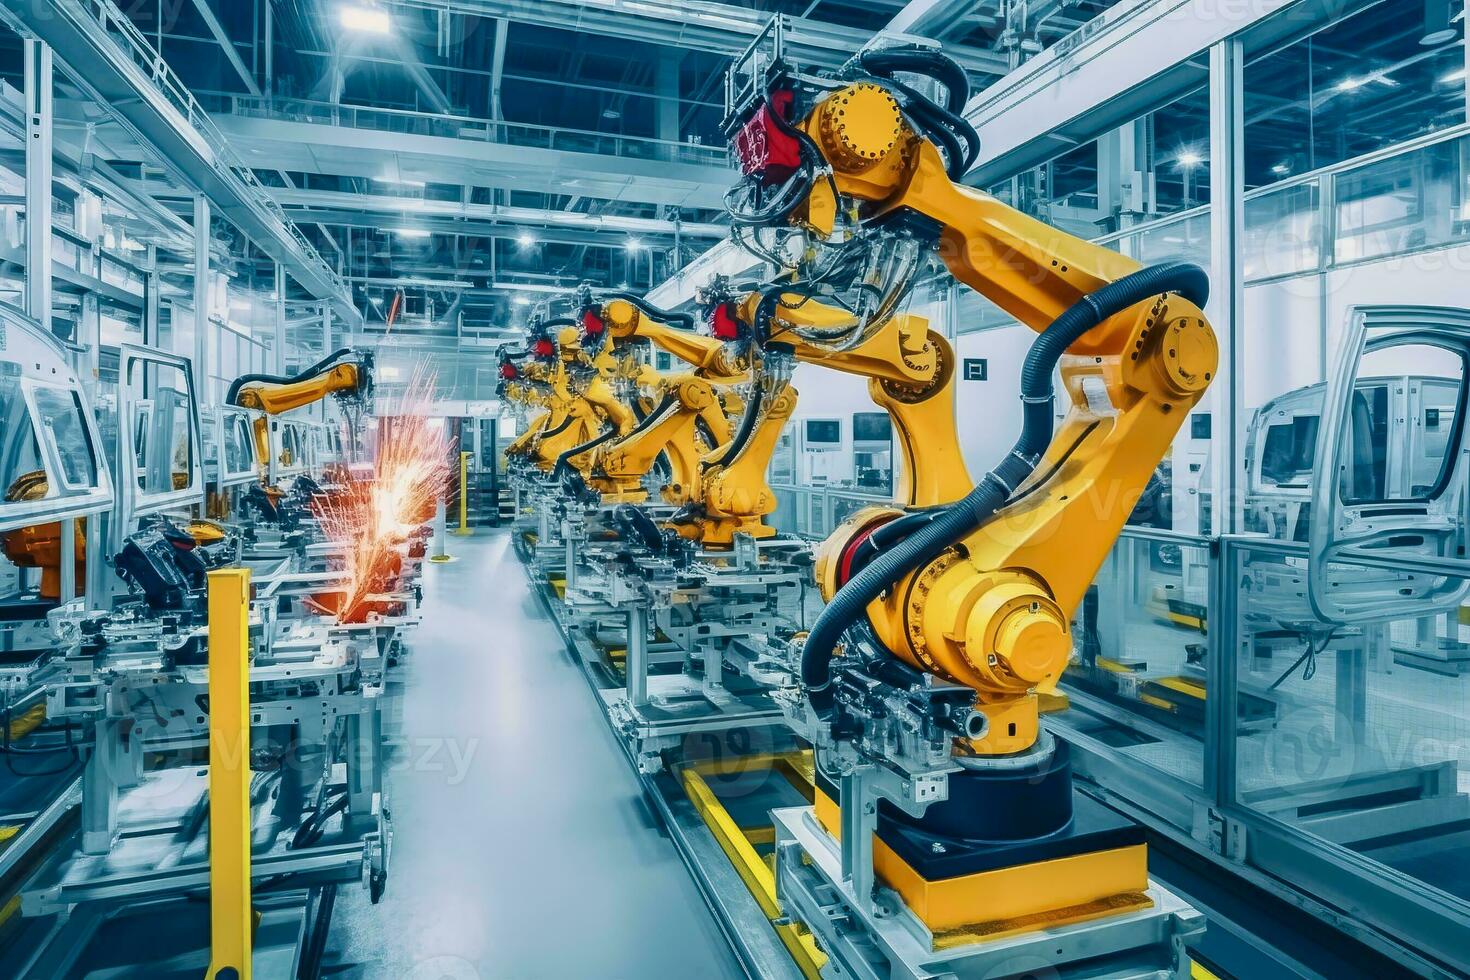 Industrial welding robotic arm in production line manufacturing plant, Automated robot arm assembly line manufacturing photo